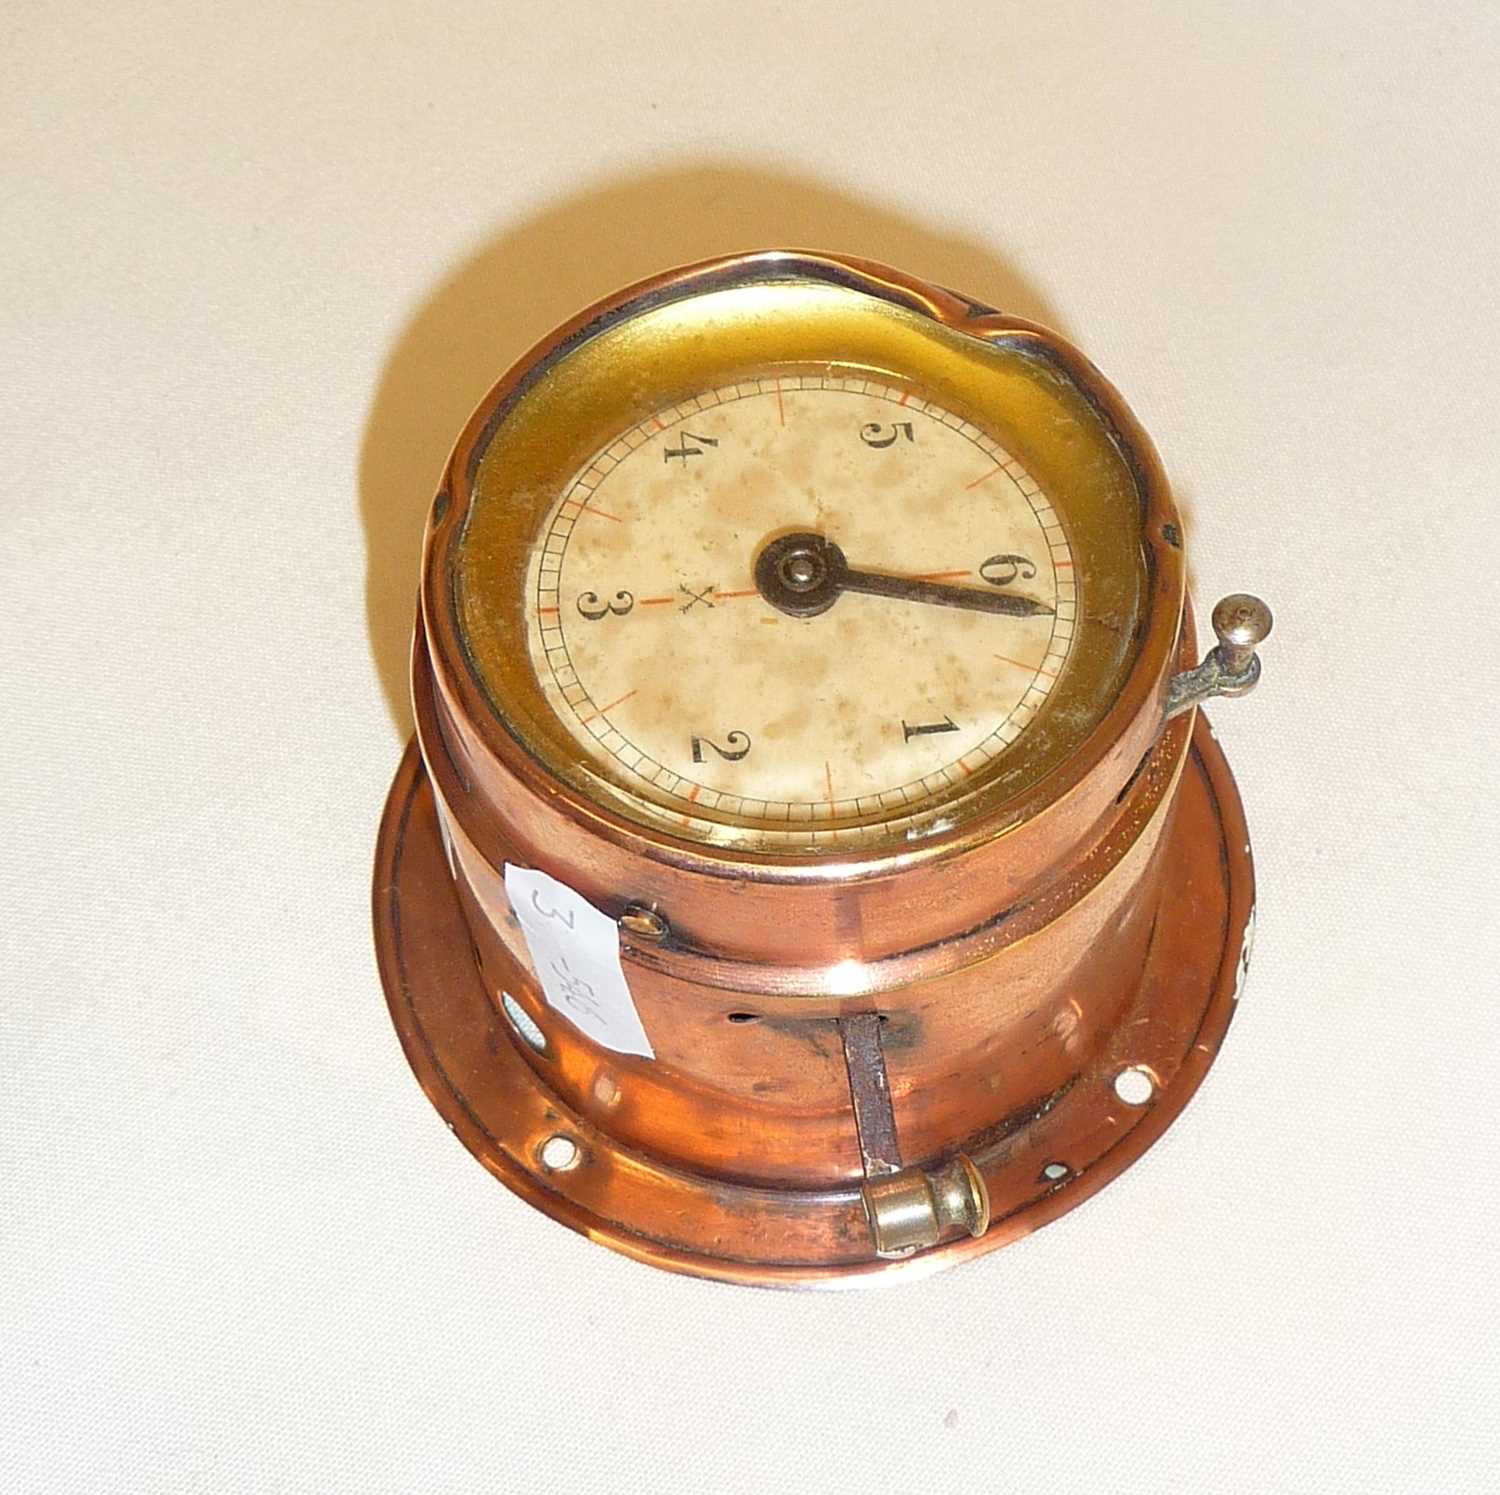 Naval copper covered 6 minute timer clock, possibly from a submarine - Image 3 of 4